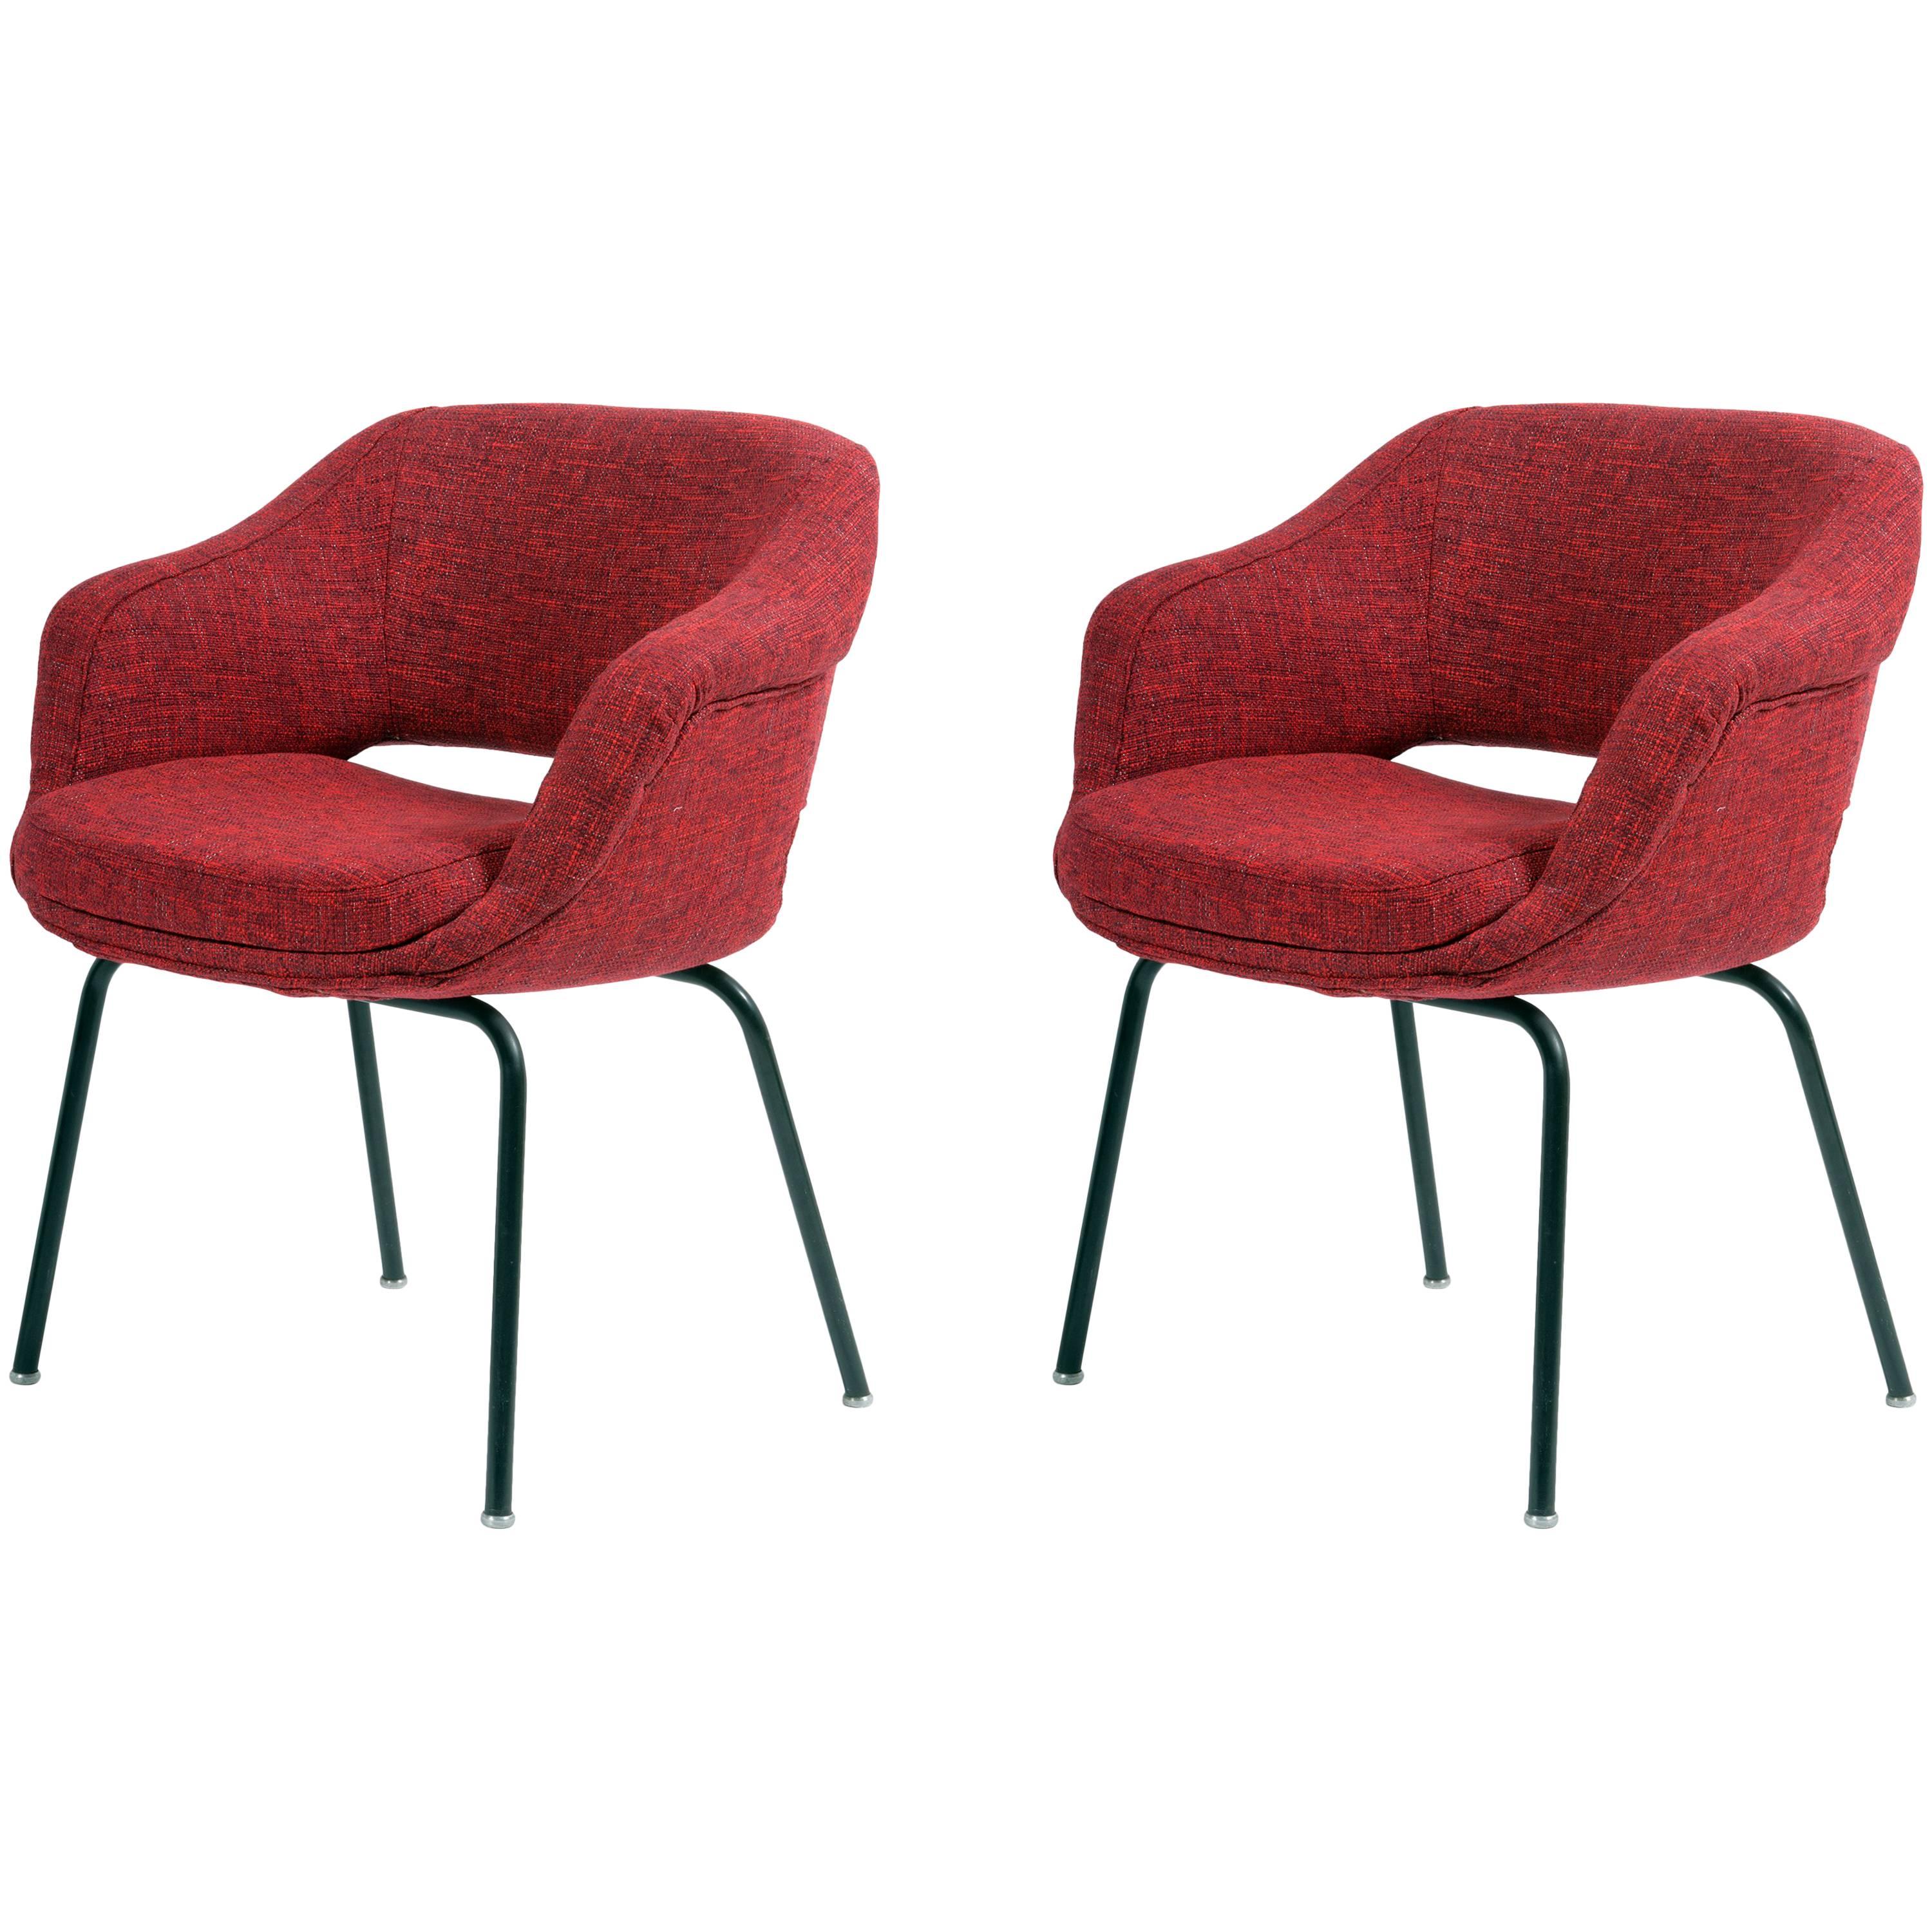 Pair of Cassina Mid-Century Little Armchairs, Signed by Olli Mannermaa Publiched